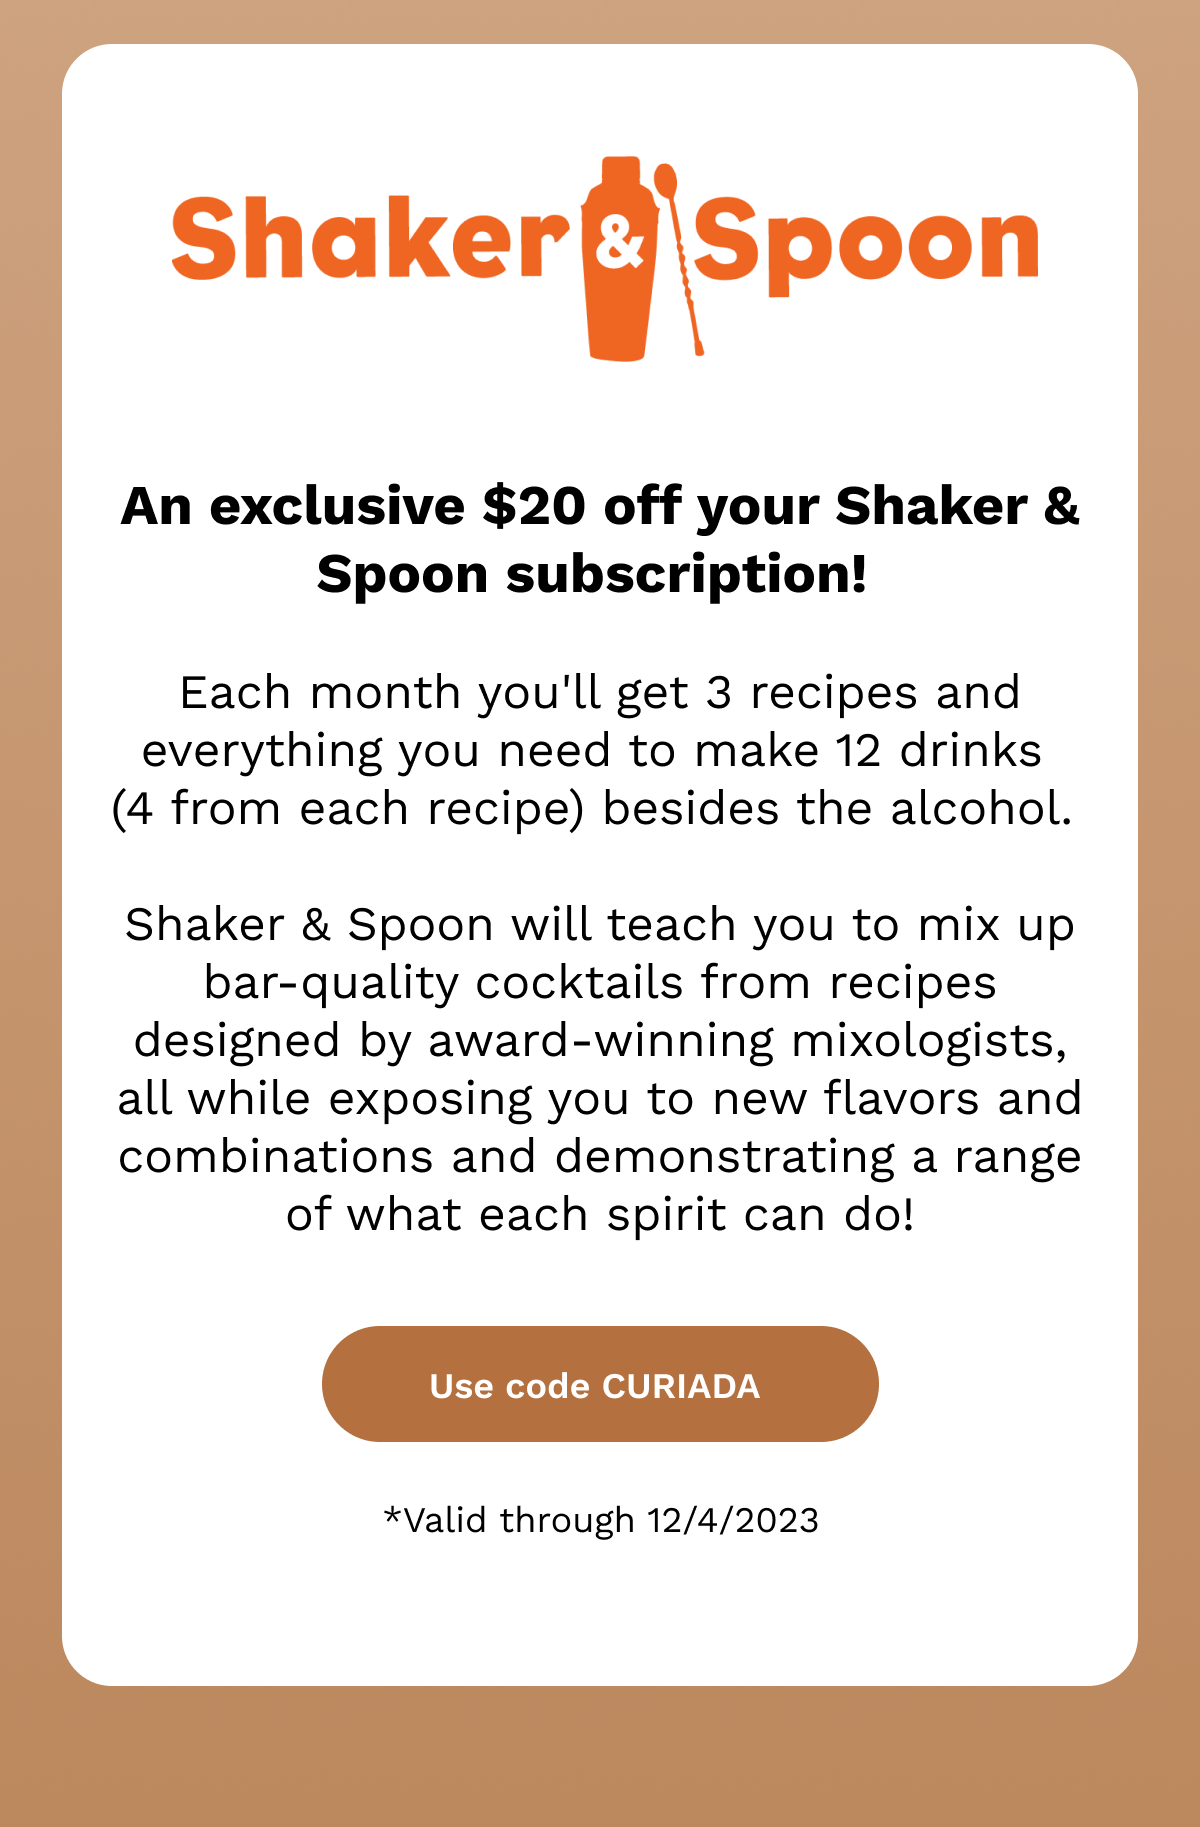 Shaker & Spoon: \\$20 Off Your Subscription